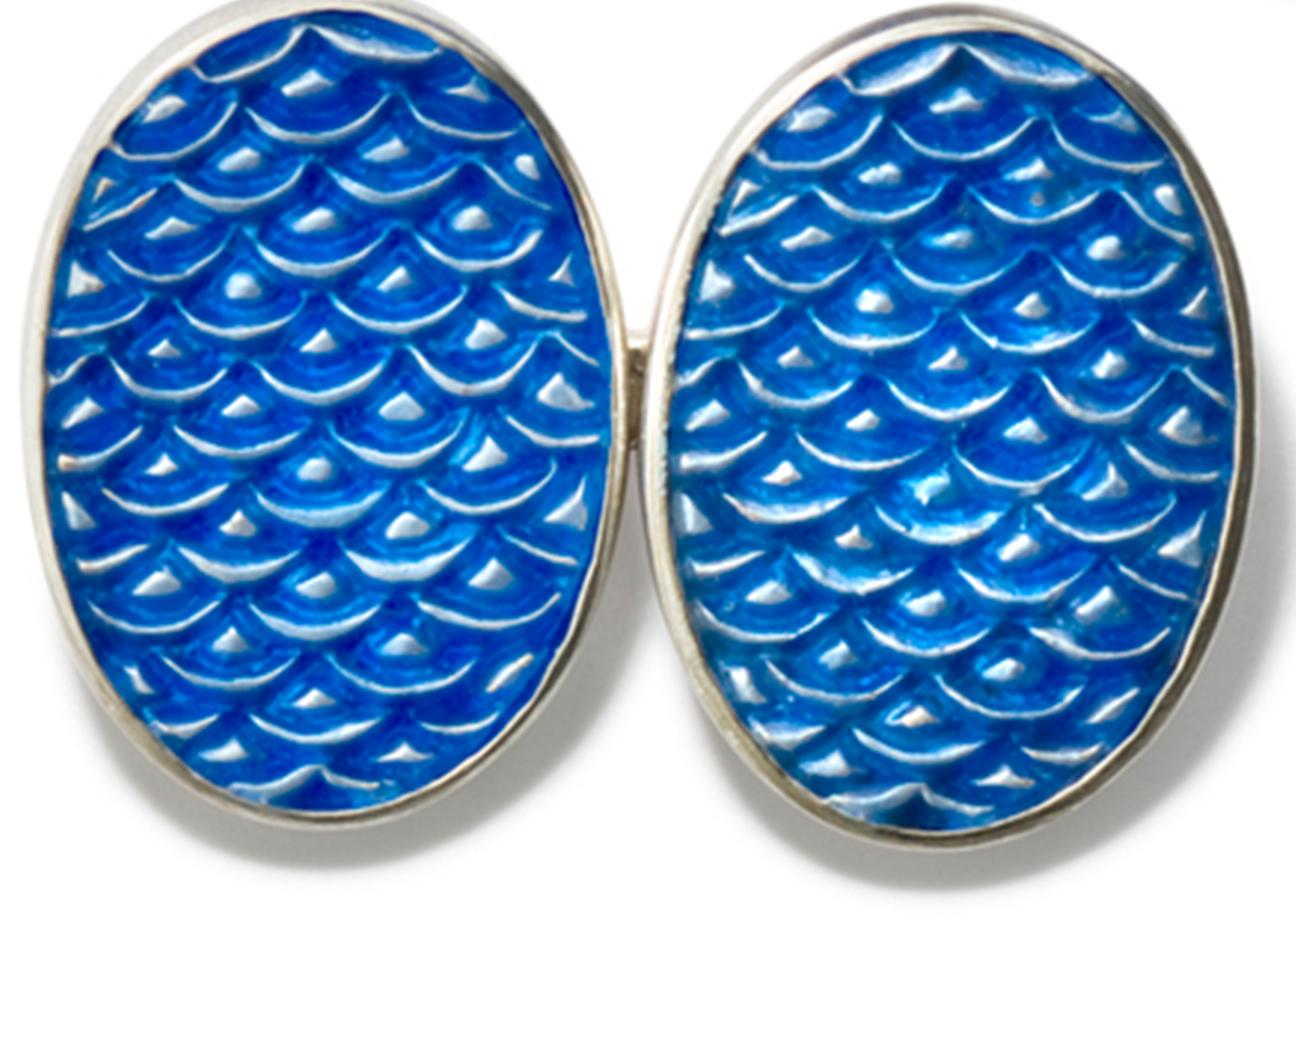 Seigai waves silver with blue enamel cufflink - Seigai or Inase is the dashing style from the Edo period when Japanese people felt an intimacy with water. From the Journey to Japan.